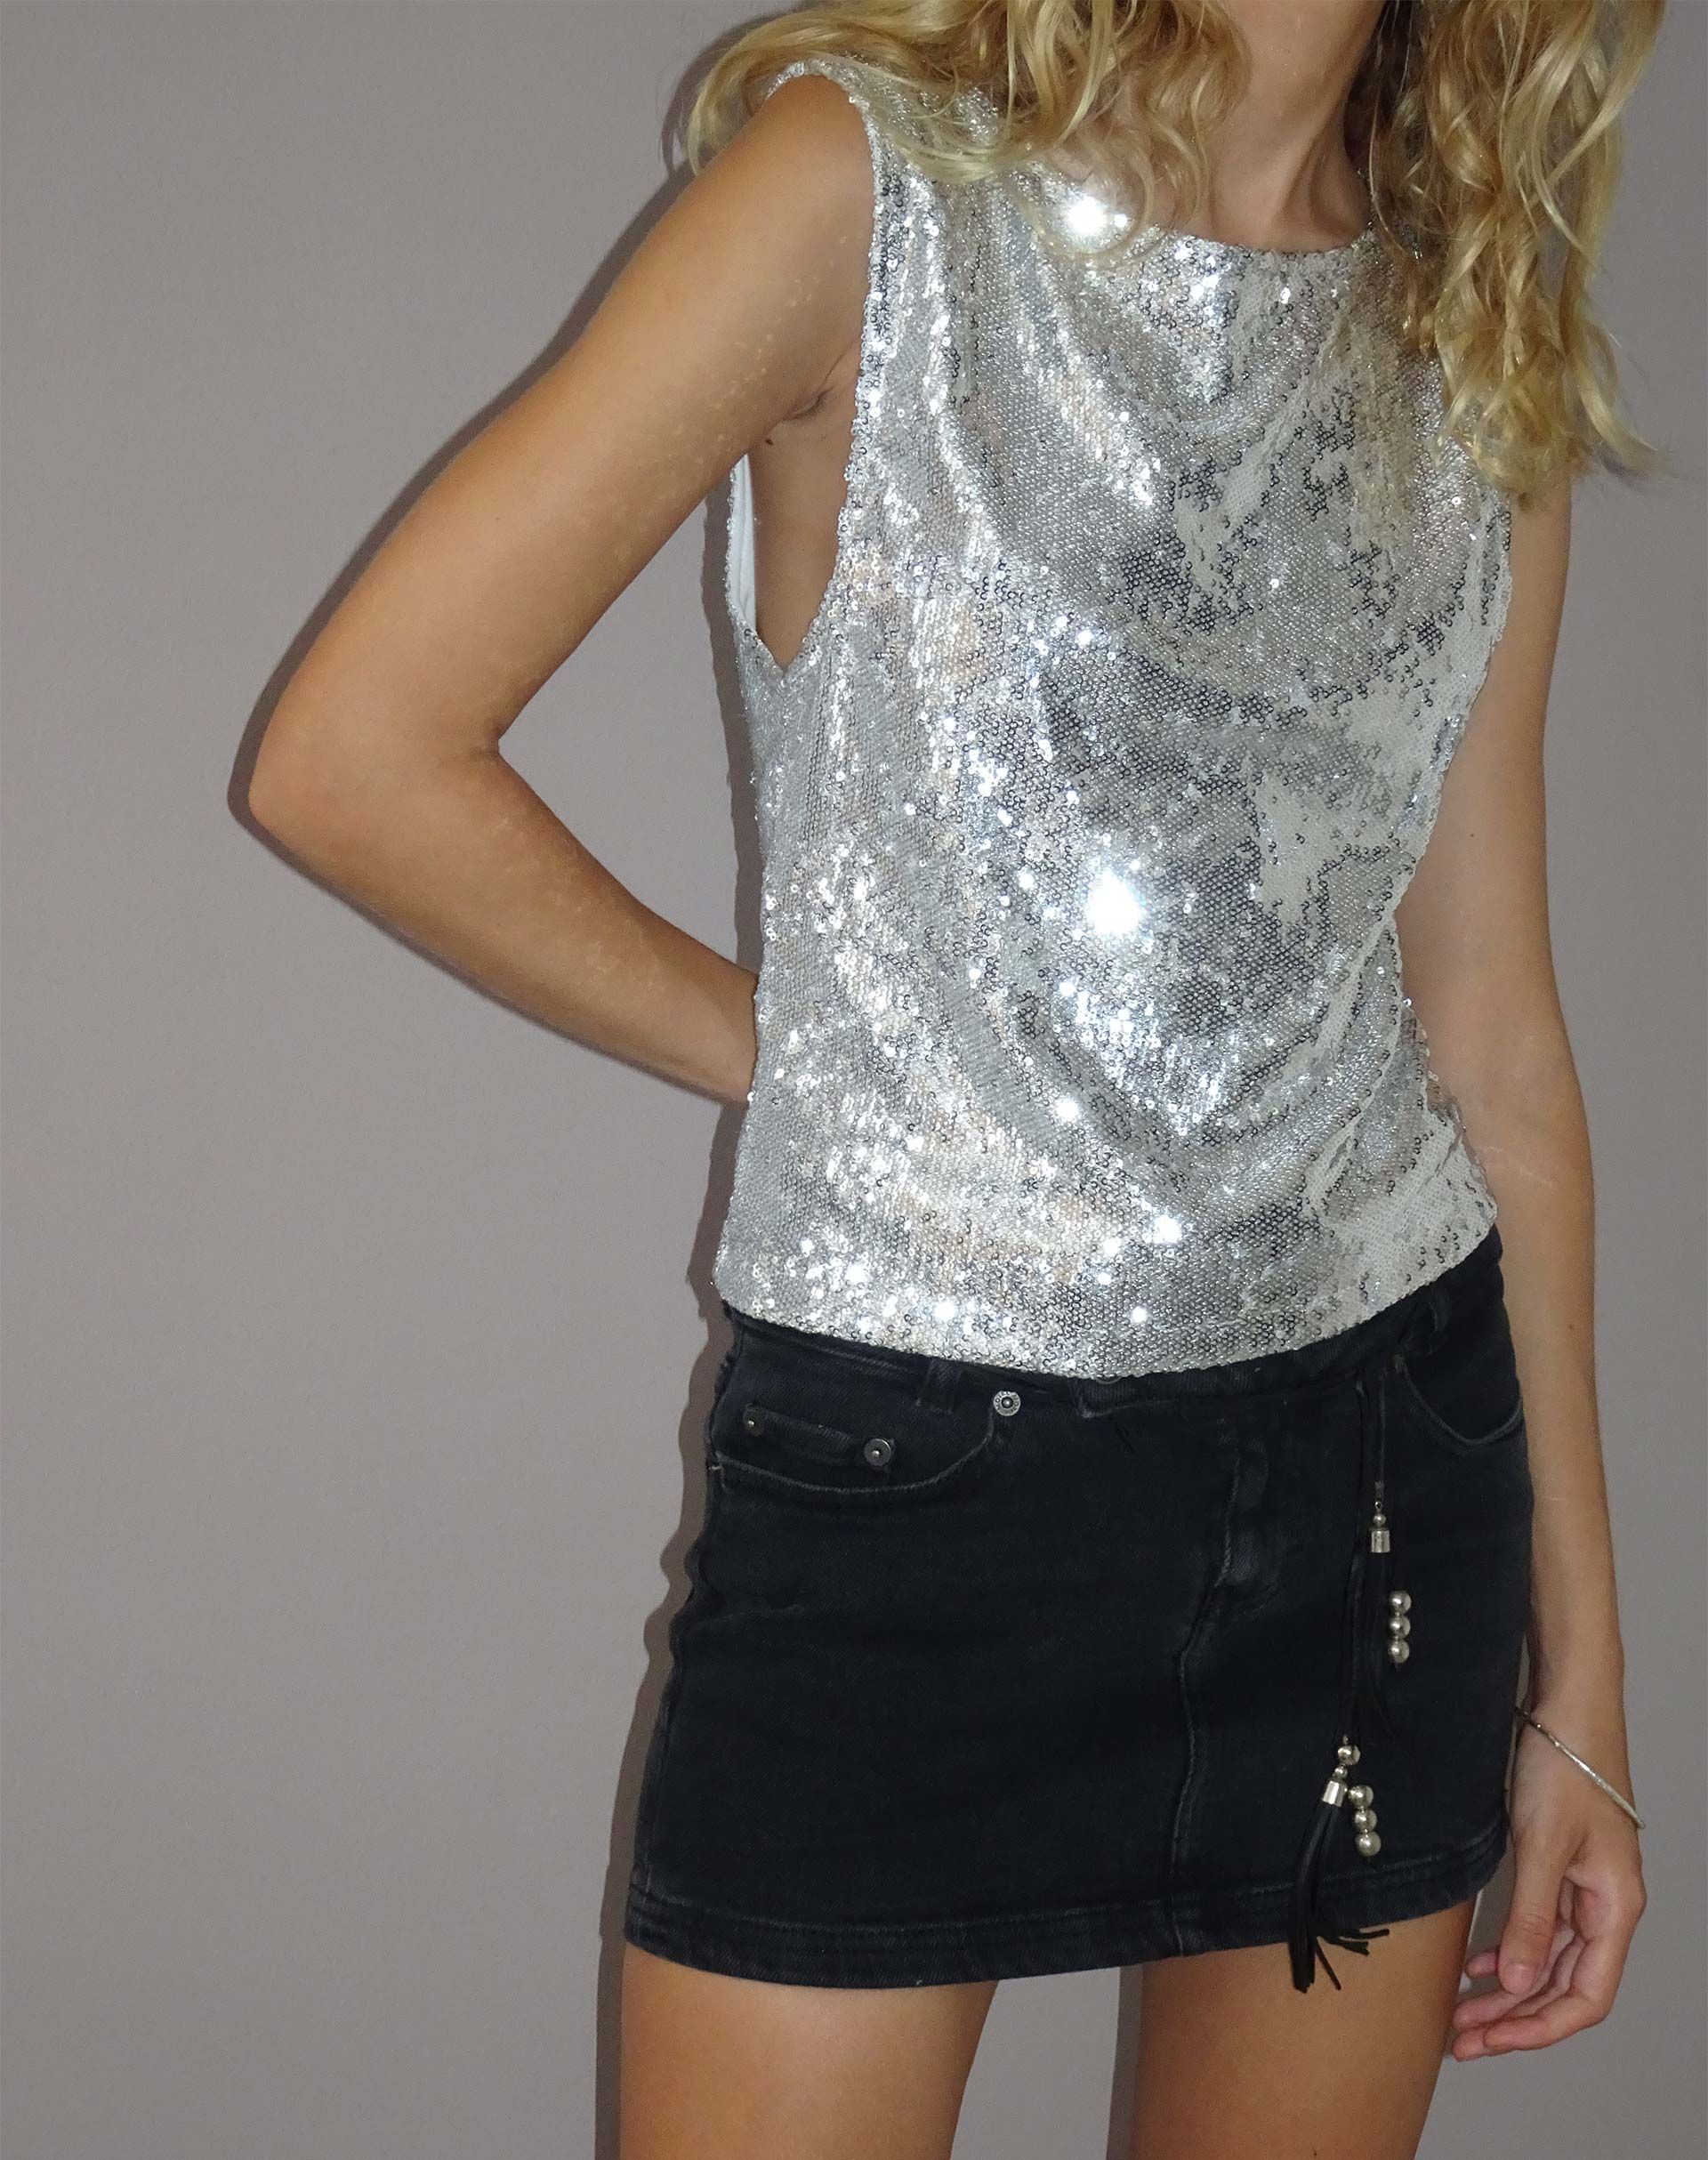 How to Style Silver Sequin Top: Best 13 Eye Catching Outfits for Ladies